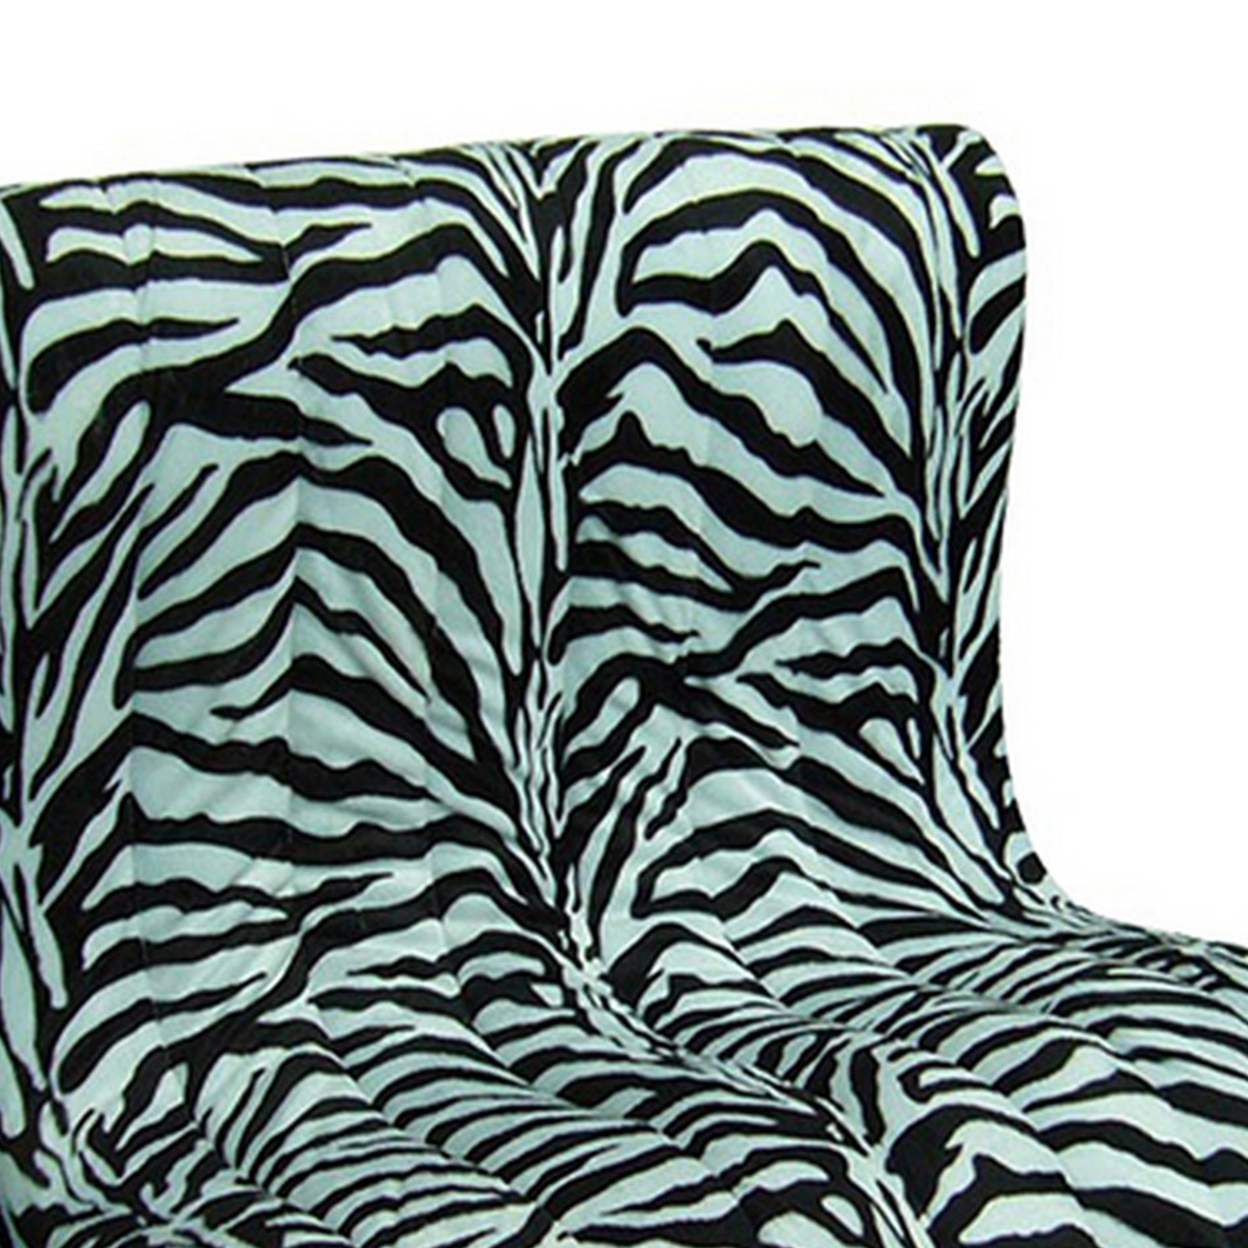 Pet Bed With Zebra Pattern Fabric And Curved Back, Black And White- Saltoro Sherpi